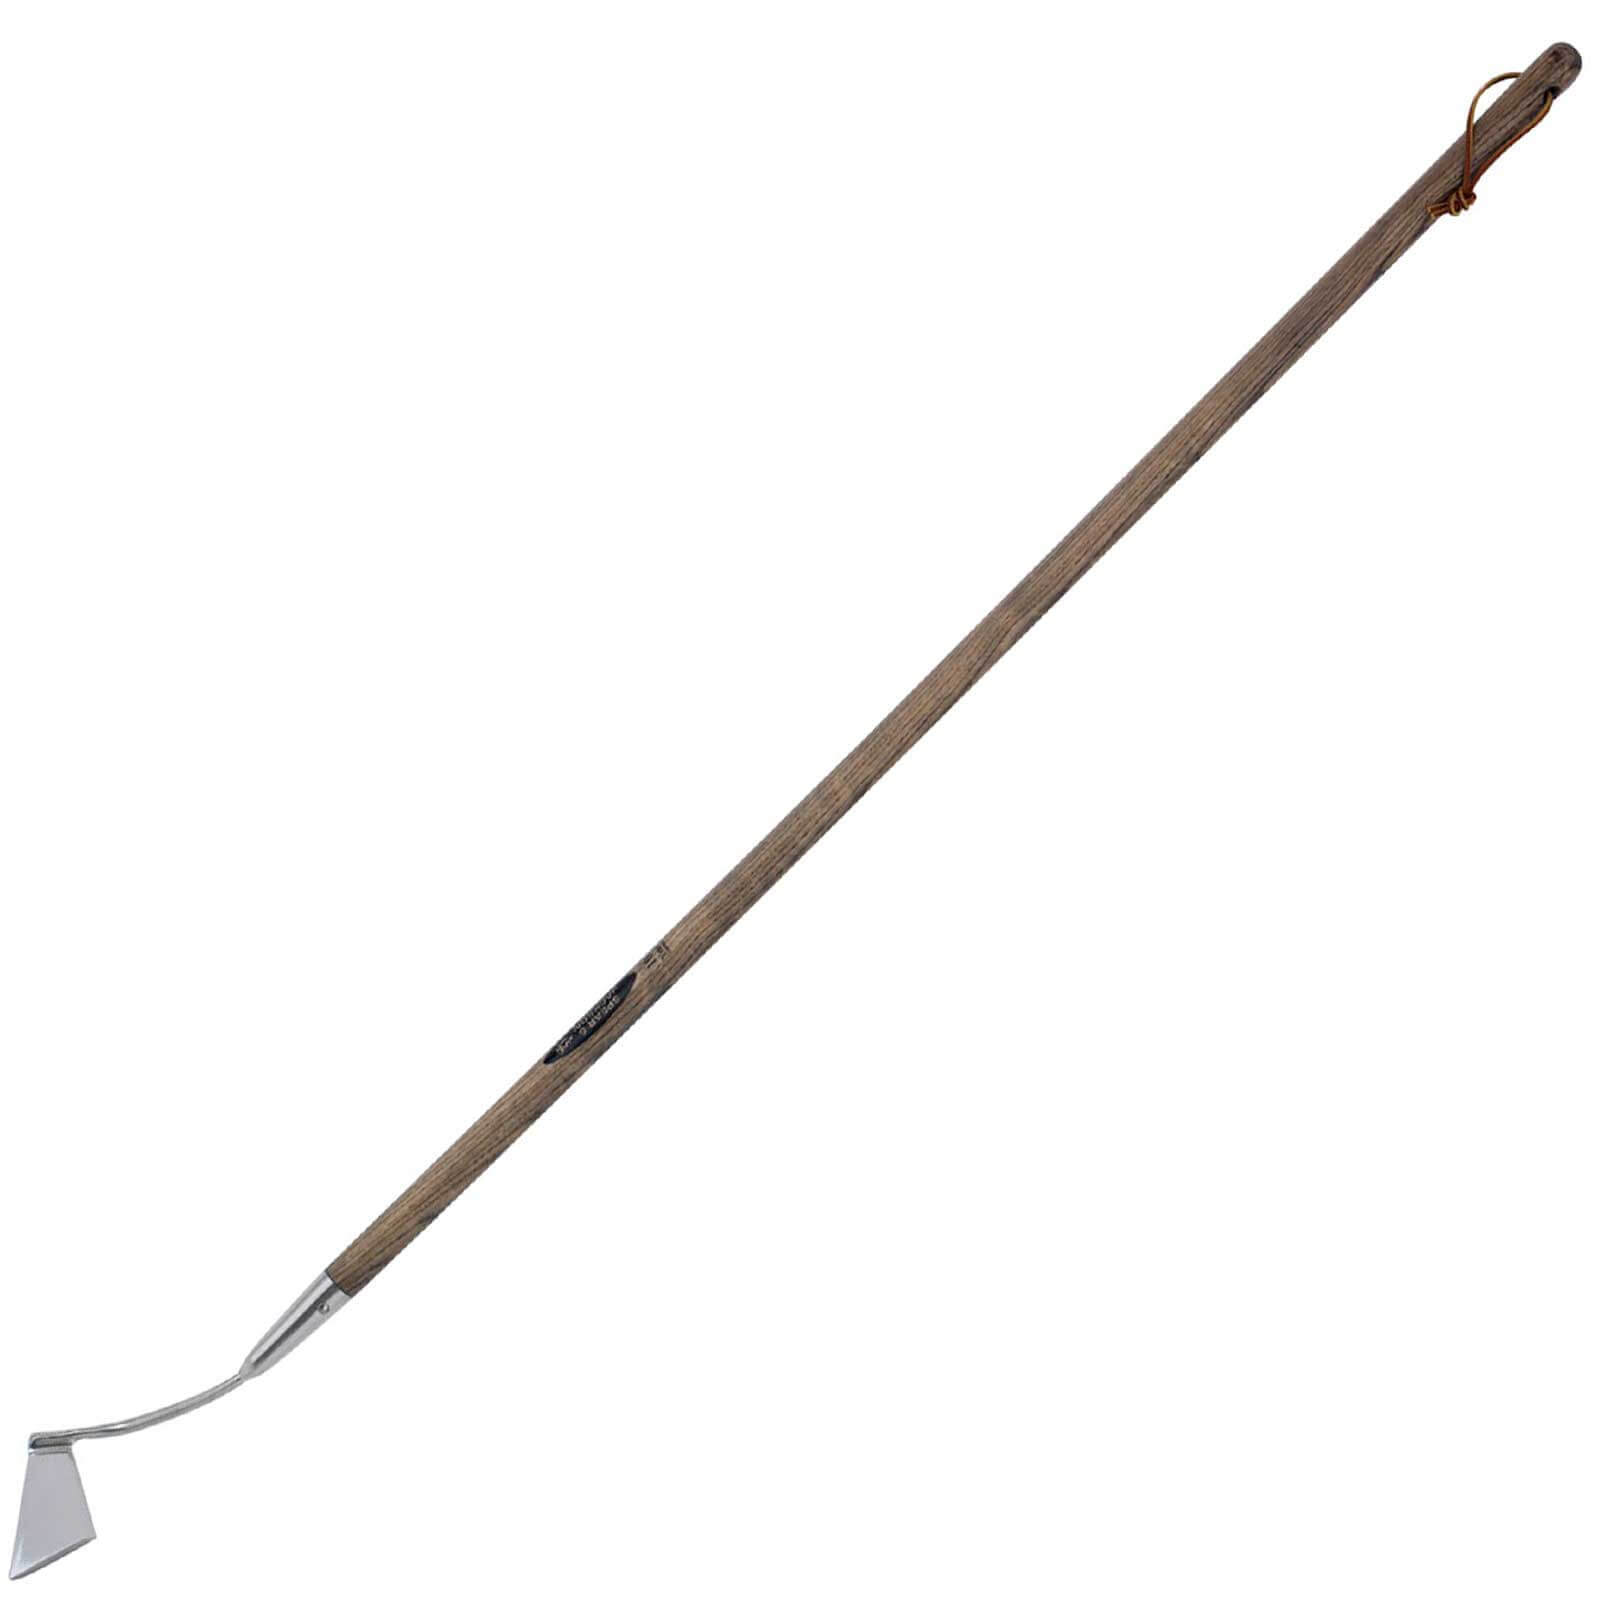 Photos - Planting Tools Spear & Jackson Spear and Jackson Traditional Stainless Steel Angled Draw Hoe 4860SW 